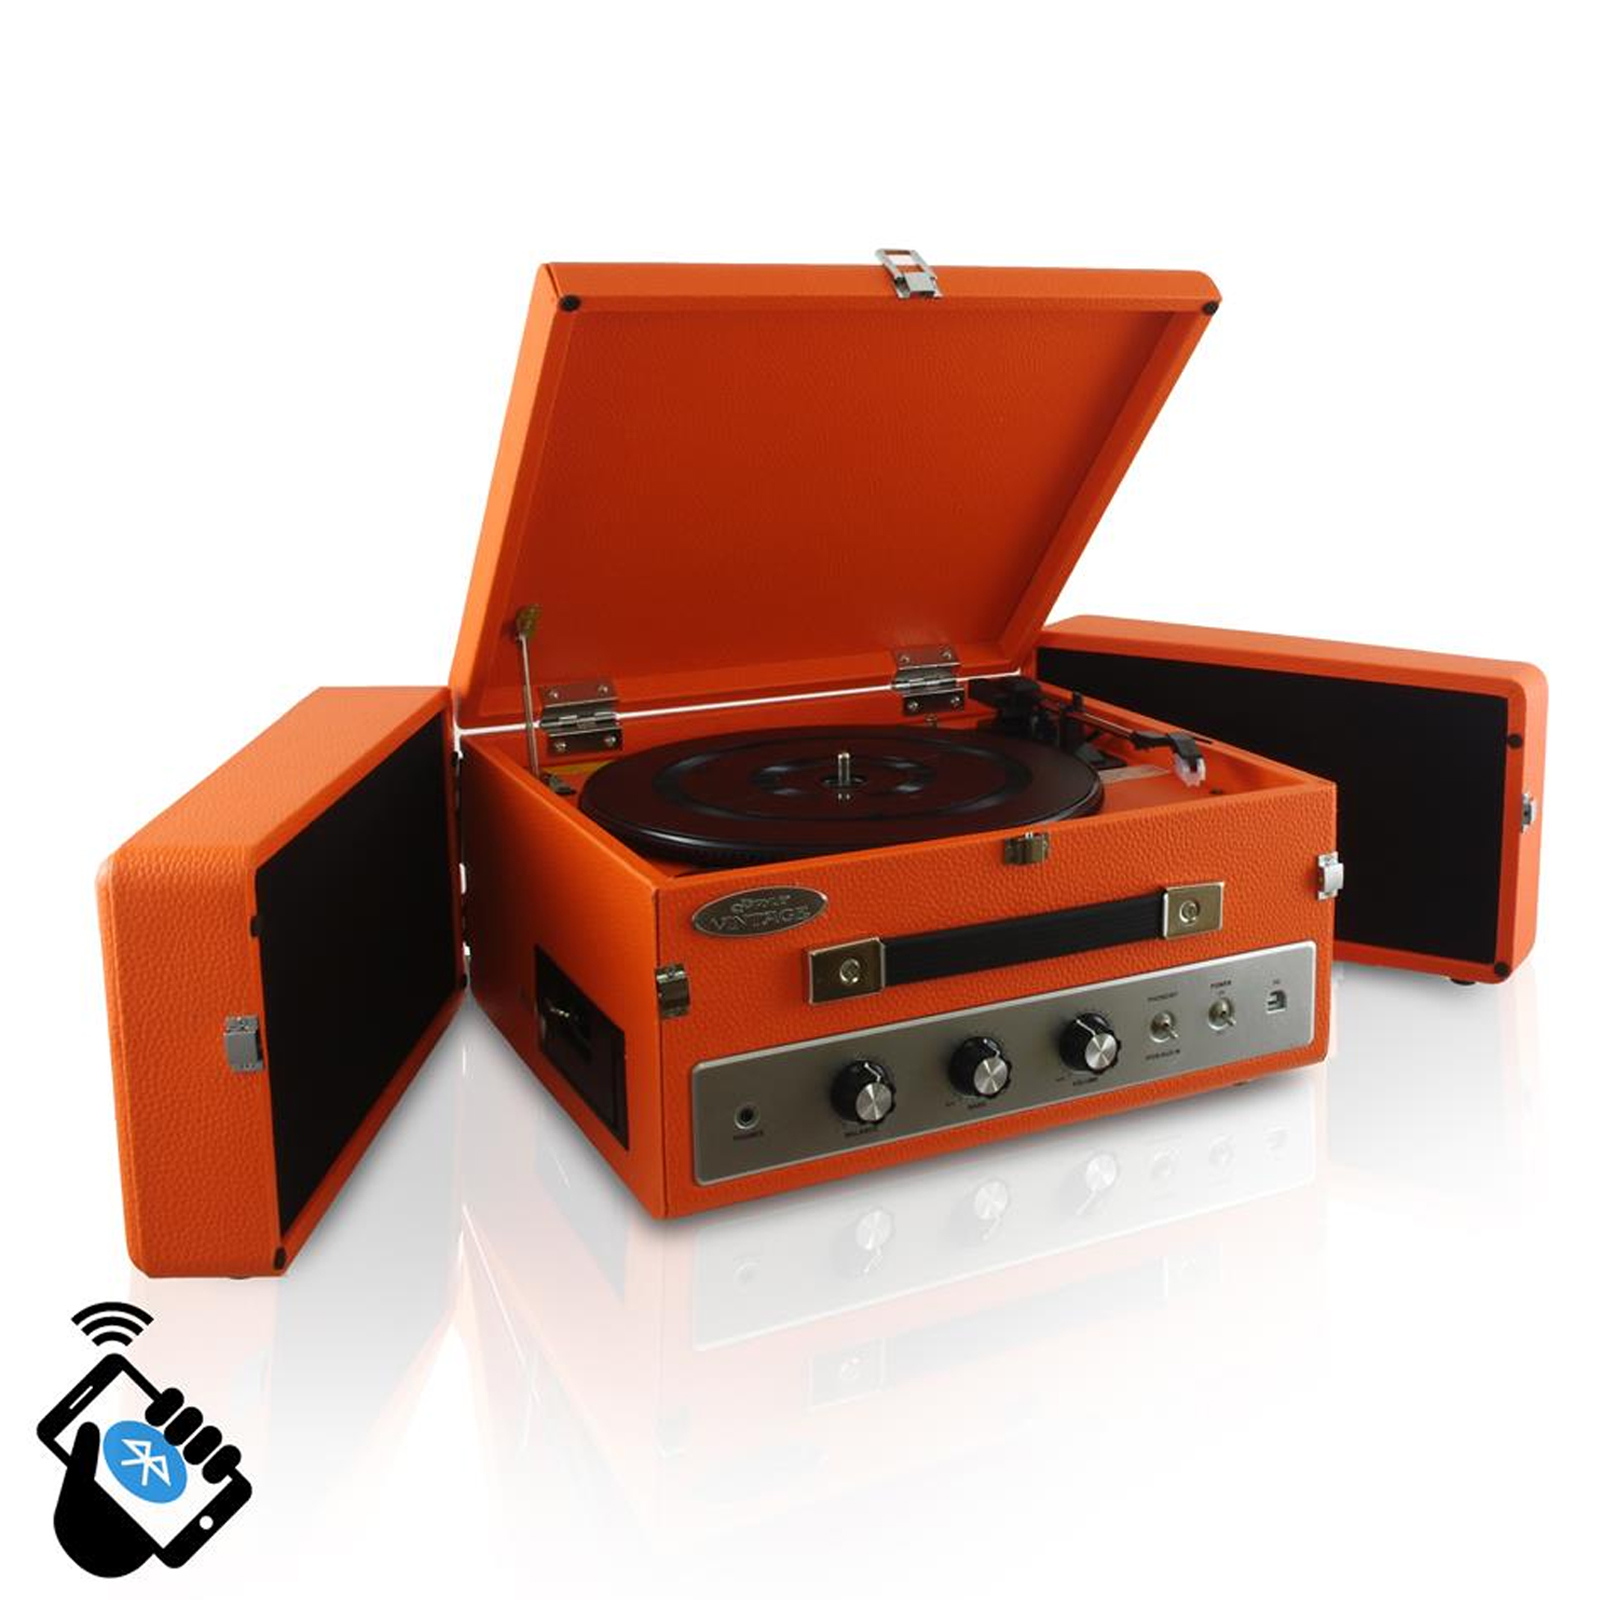 Pyle Home Retro Vintage Classic Style BT Turntable Record Player with Vinyl-to-MP3 Recording- Orange - image 1 of 1